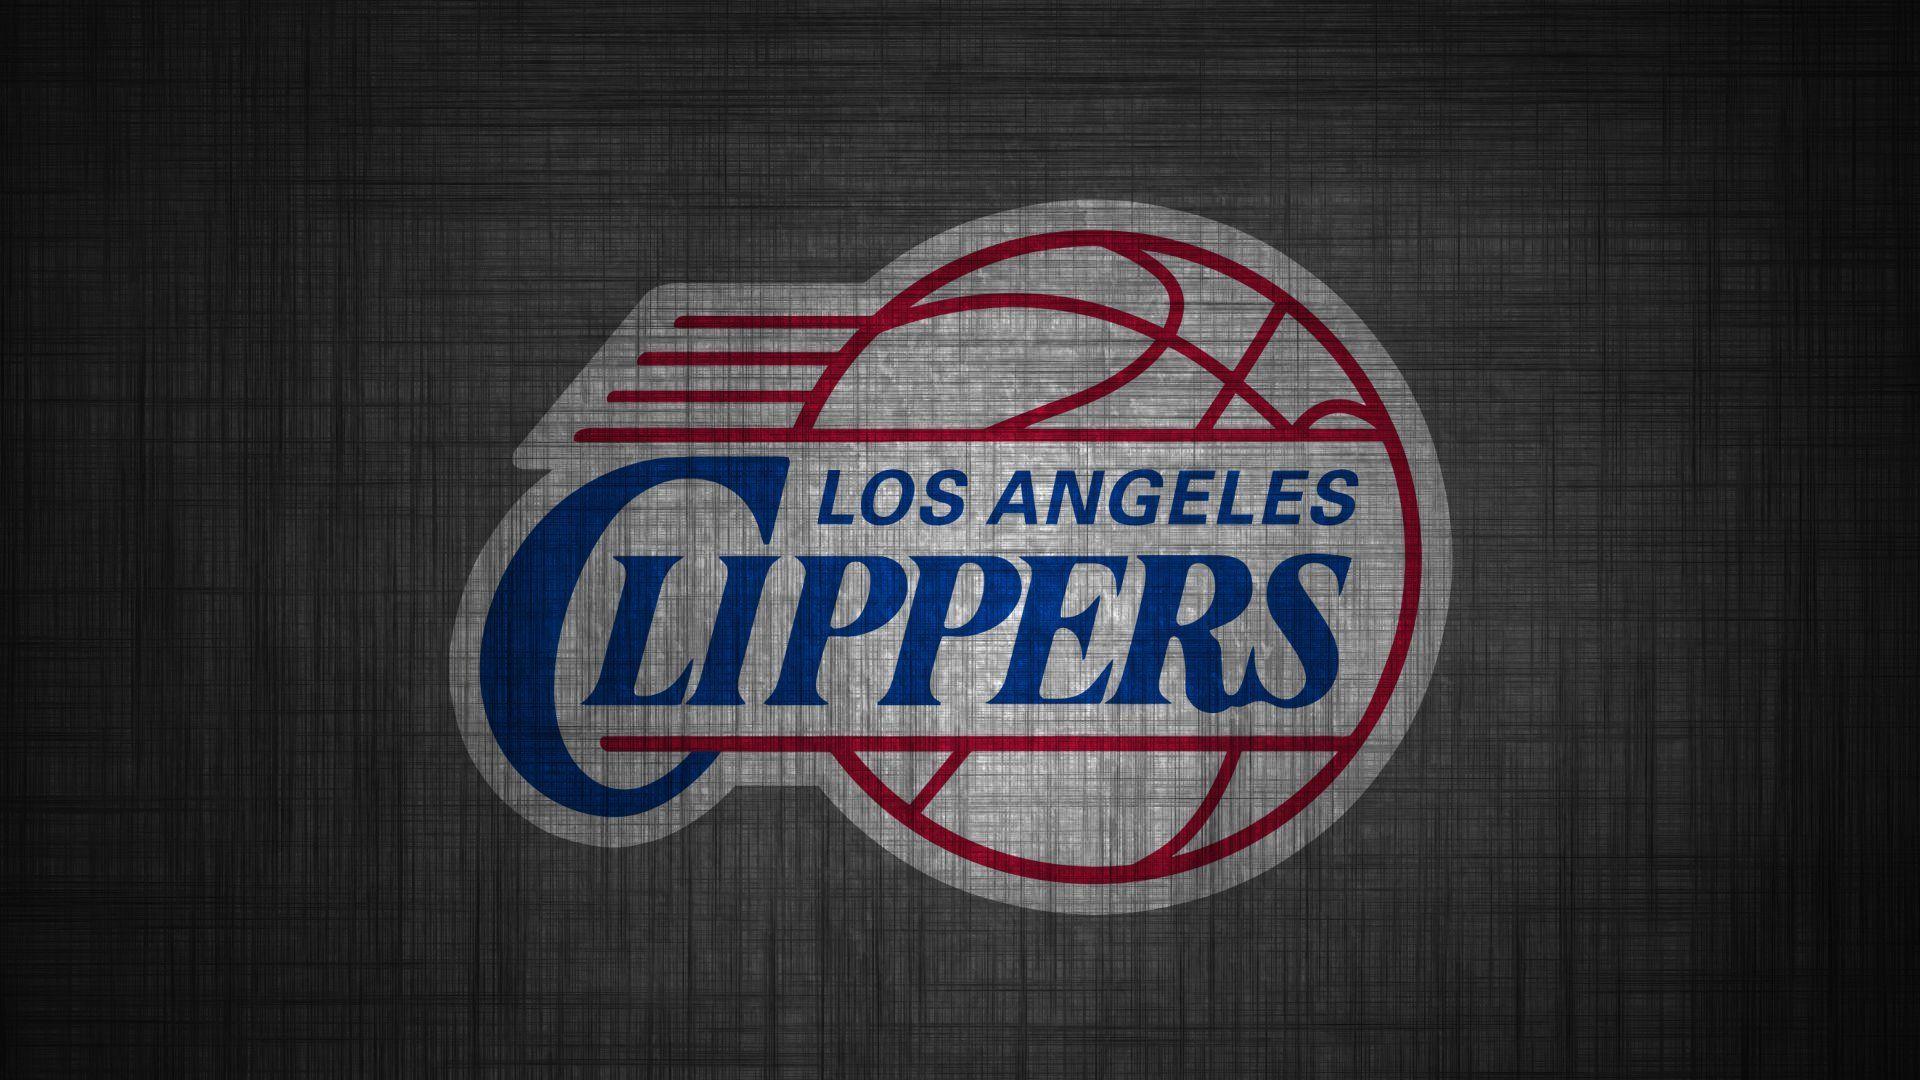 Los Angeles Clippers Wallpaper Free Los Angeles